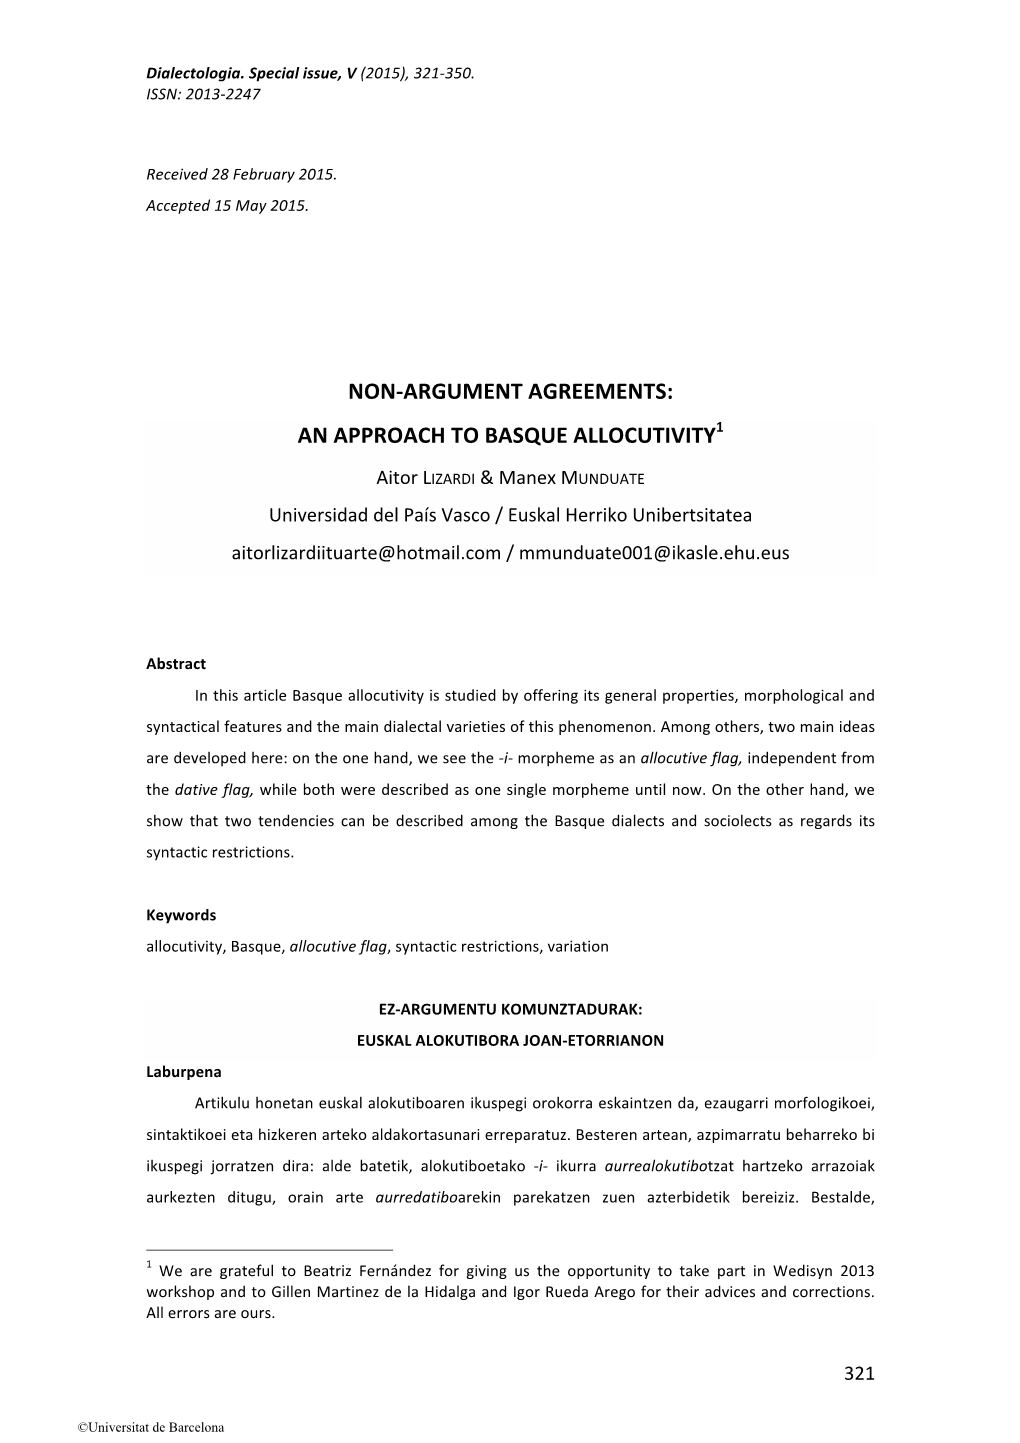 Non-Argument Agreements: an Approach to Basque Allocutivity1